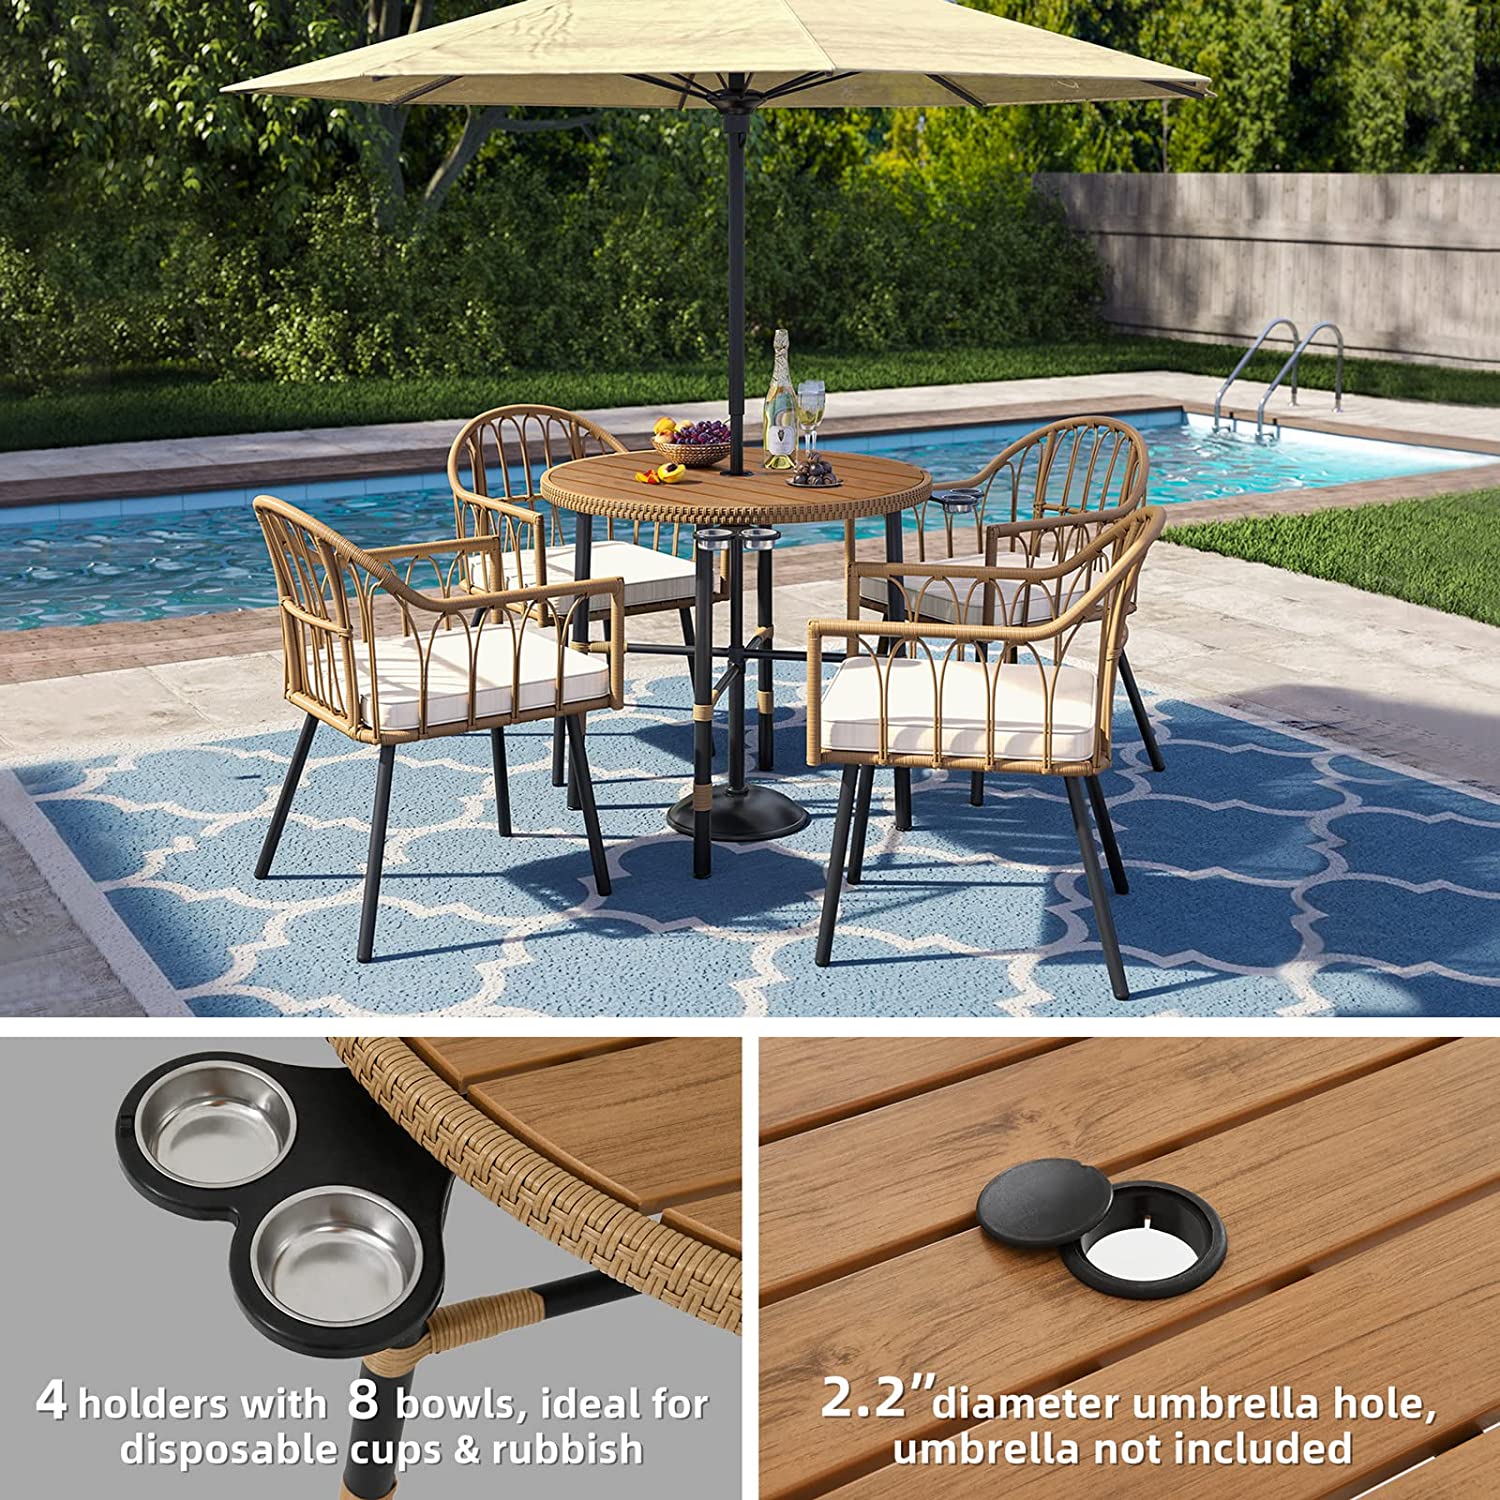 Dextrus 5 pieces Outdoor Patio Dining Table Set, 4 Rattan Wicker Dining Chair and Round Table With Umbrella Hole, Sectional Conversation Set for Backyard, Balcony, Garden, Lawn - image 3 of 9